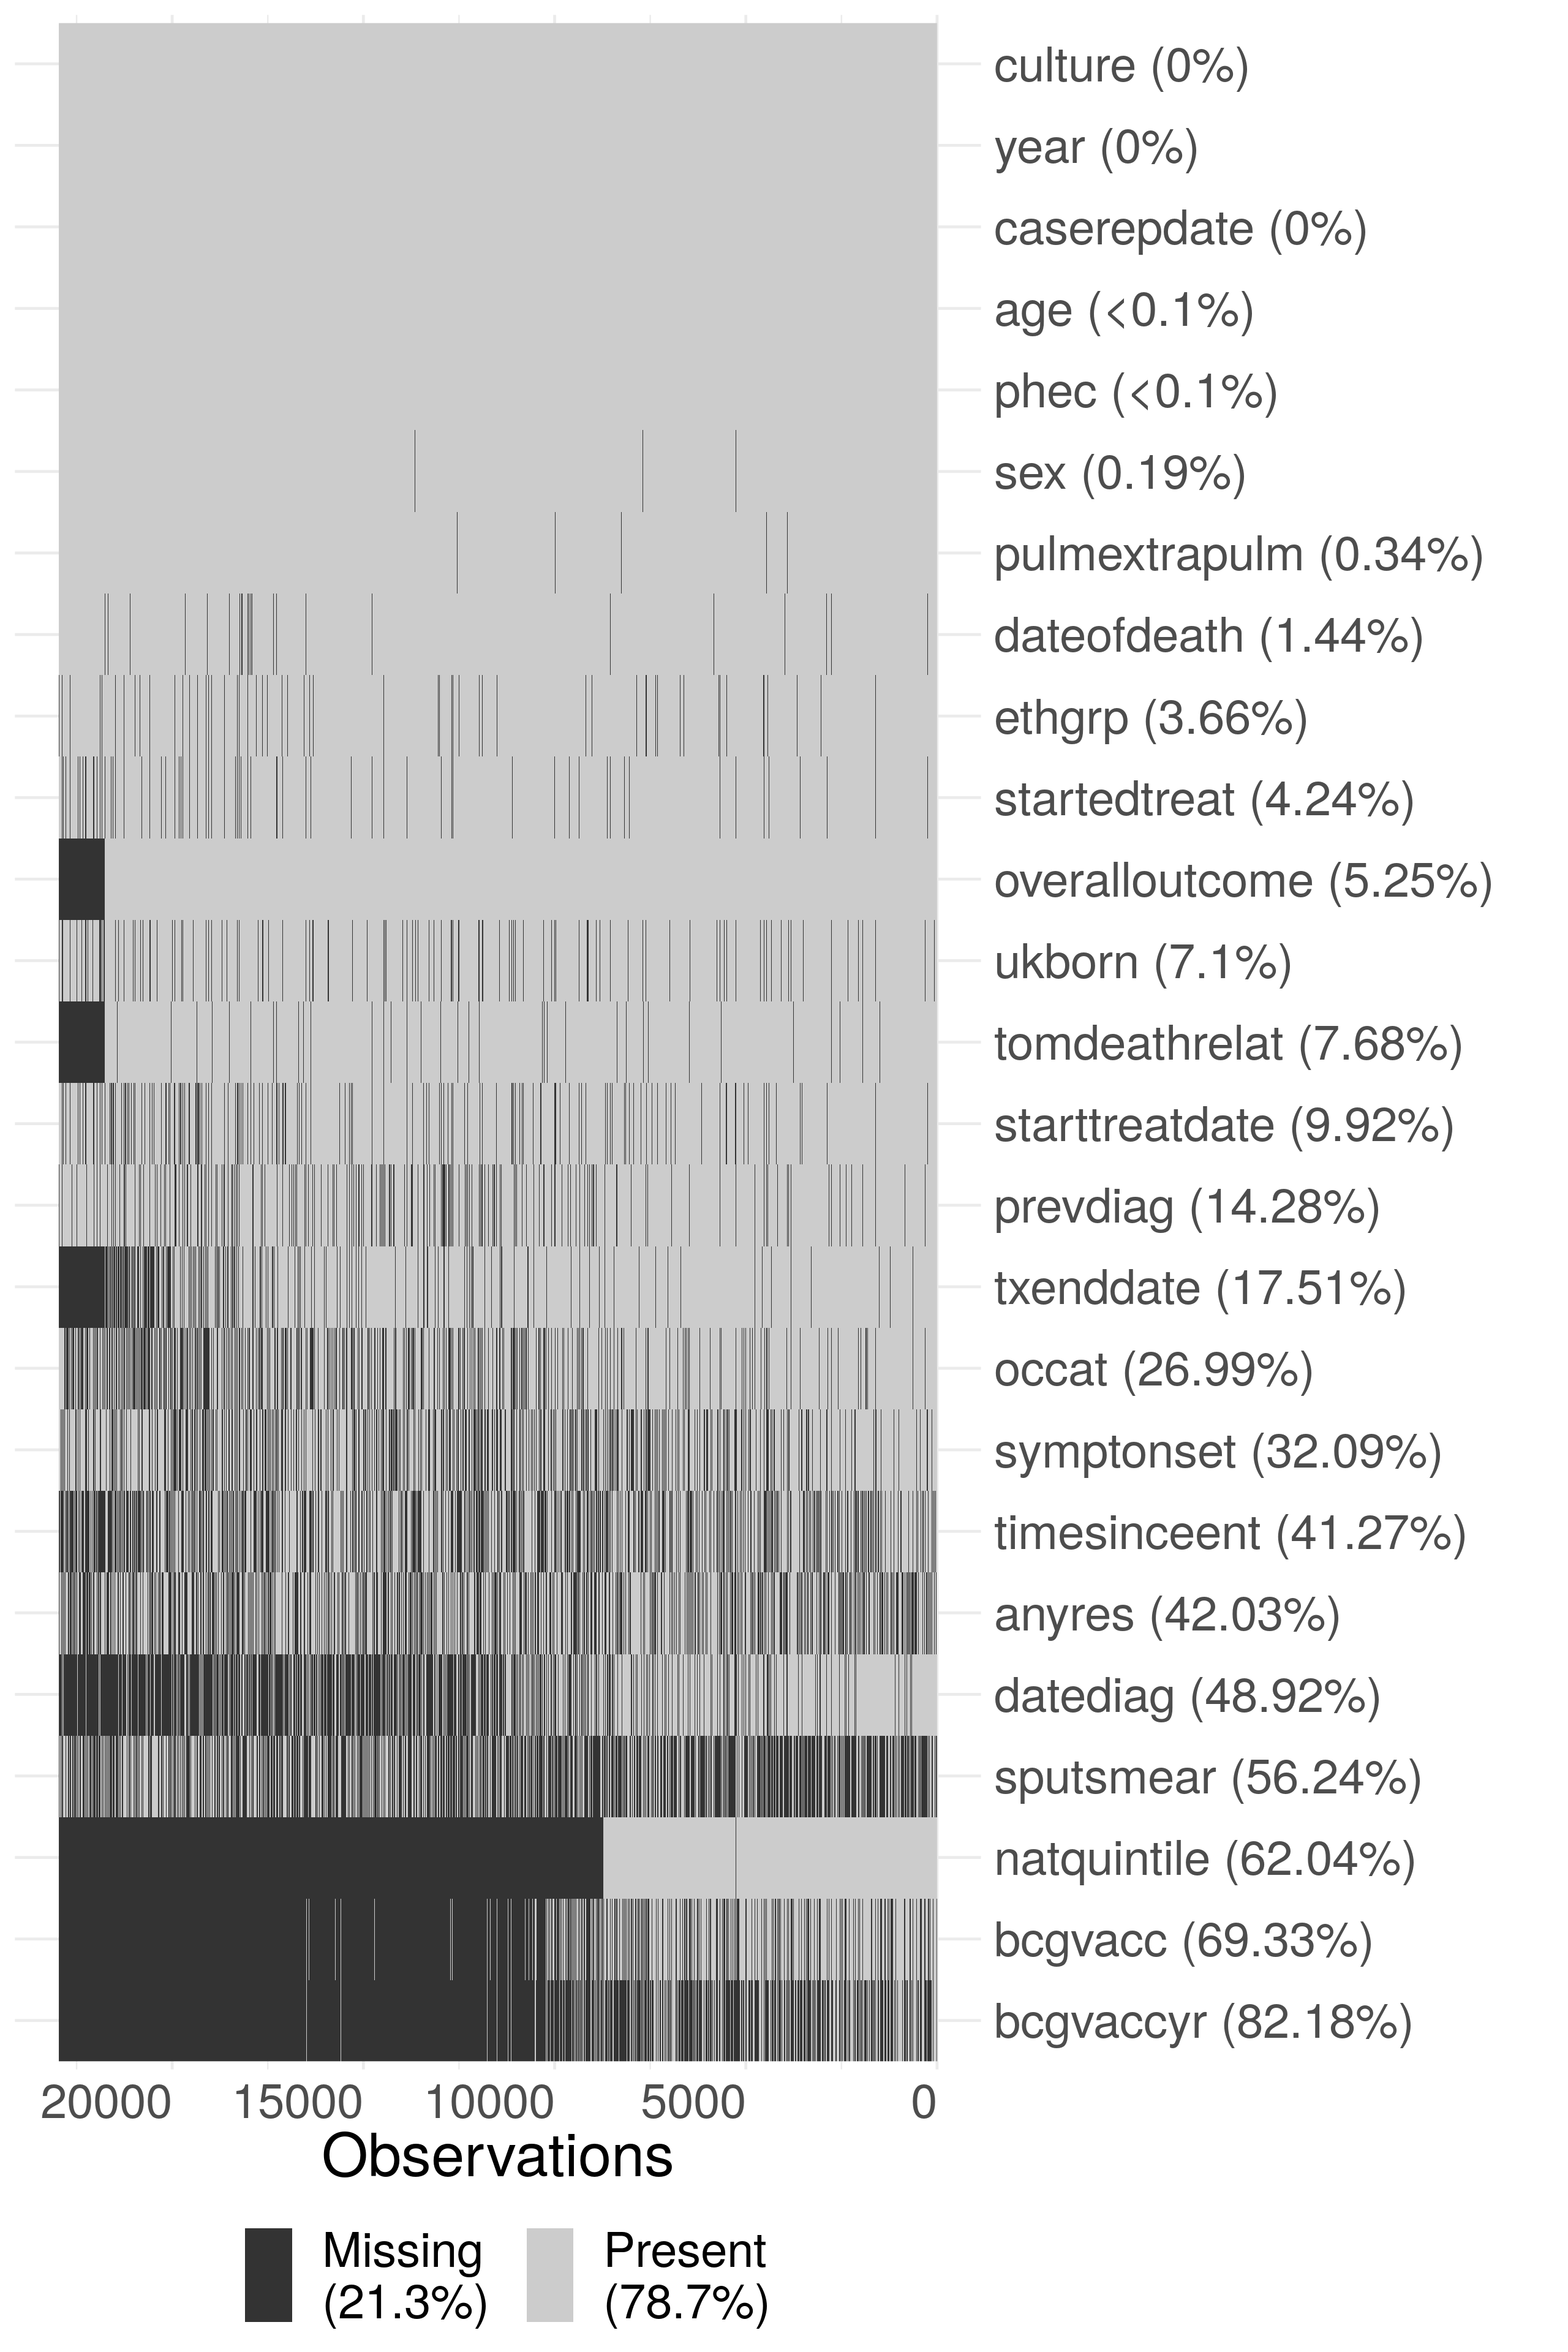 Summary plot of missing data in the extract of the ETS data used in this thesis. Due to the large size of the dataset, the data has been sub-sampled with only 20\% of the data shown in this figure. Notifications have been ordered by date of notification from left to right. The following subset of variables are shown: year (year), sex (sex), age (age), PHE Centre (phec), Occupation (occat), Ethnic group (ethgrp), UK birth status (ukborn), Time since entry (timesinceent), date of symptom onset (symptonset), date of diagnosis (datediag), started treatment (startedtreat), date of starting treatment (starttreatdate), treatment end date (txenddate), pulmonary or extra-pulmonary TB (pulmextrapulm), culture (culture), sputum smear status (sputsmear), drug resistance (anyres), previous diagnosis (prevdiag), BCG status(bcgvacc), Year of BCG vaccination (bcgvaccyr), overall outcome (overalloutcome), cause of death (tomdeathrelat), socio-economic status quintiles (natquintile), and date of death (dateofdeath). Nested variables have been accounted for (i.e date of death has had an entry added for cases that are known to have not died), so that true missingness for all variables is estimated.